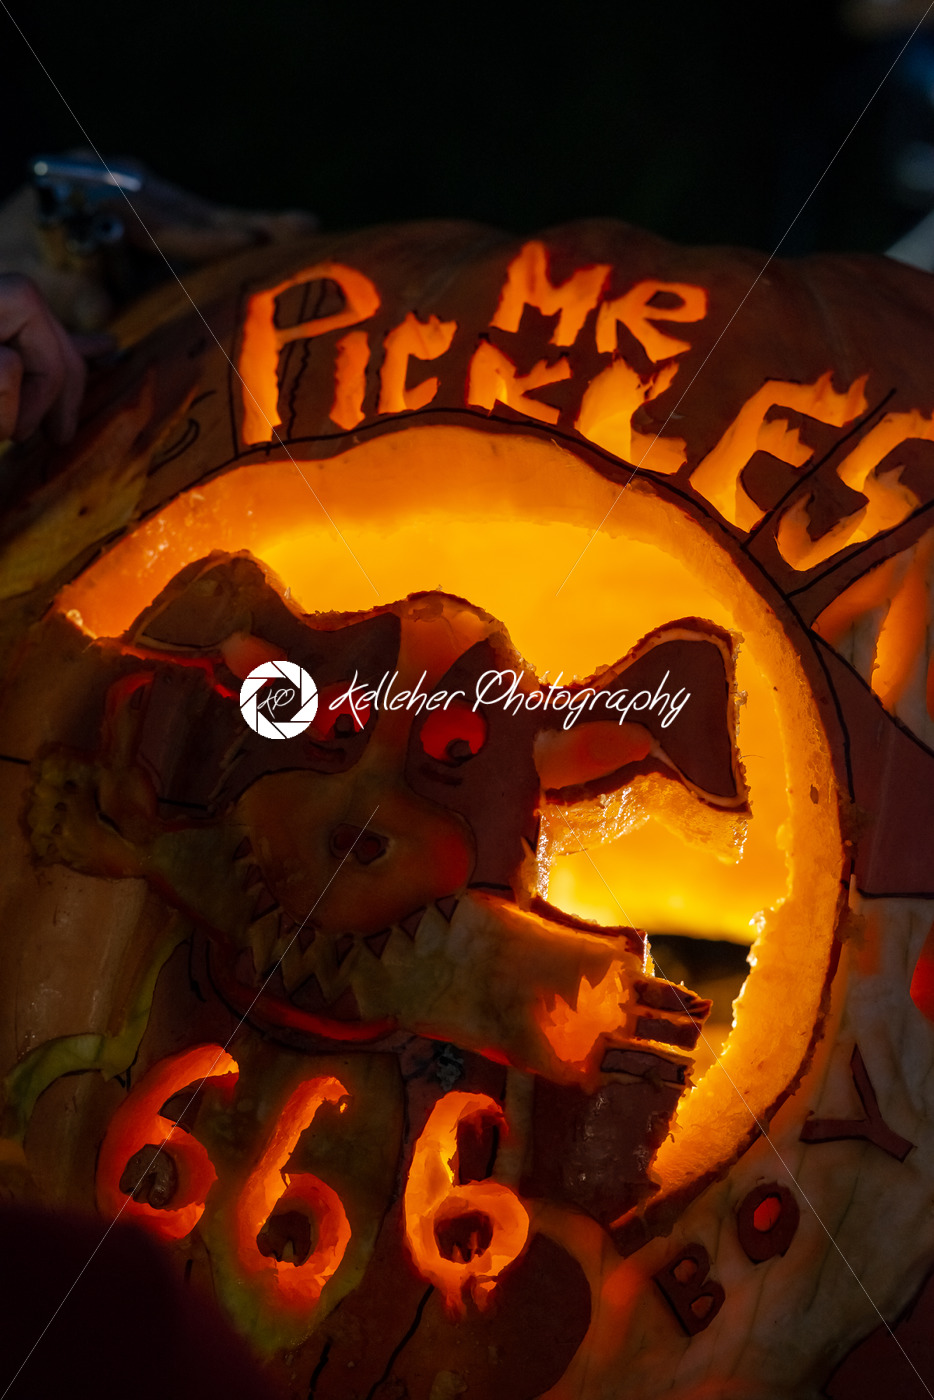 CHADDS FORD, PA – OCTOBER 18: The Great Pumpkin Carve carving contest on October 18, 2018 - Kelleher Photography Store